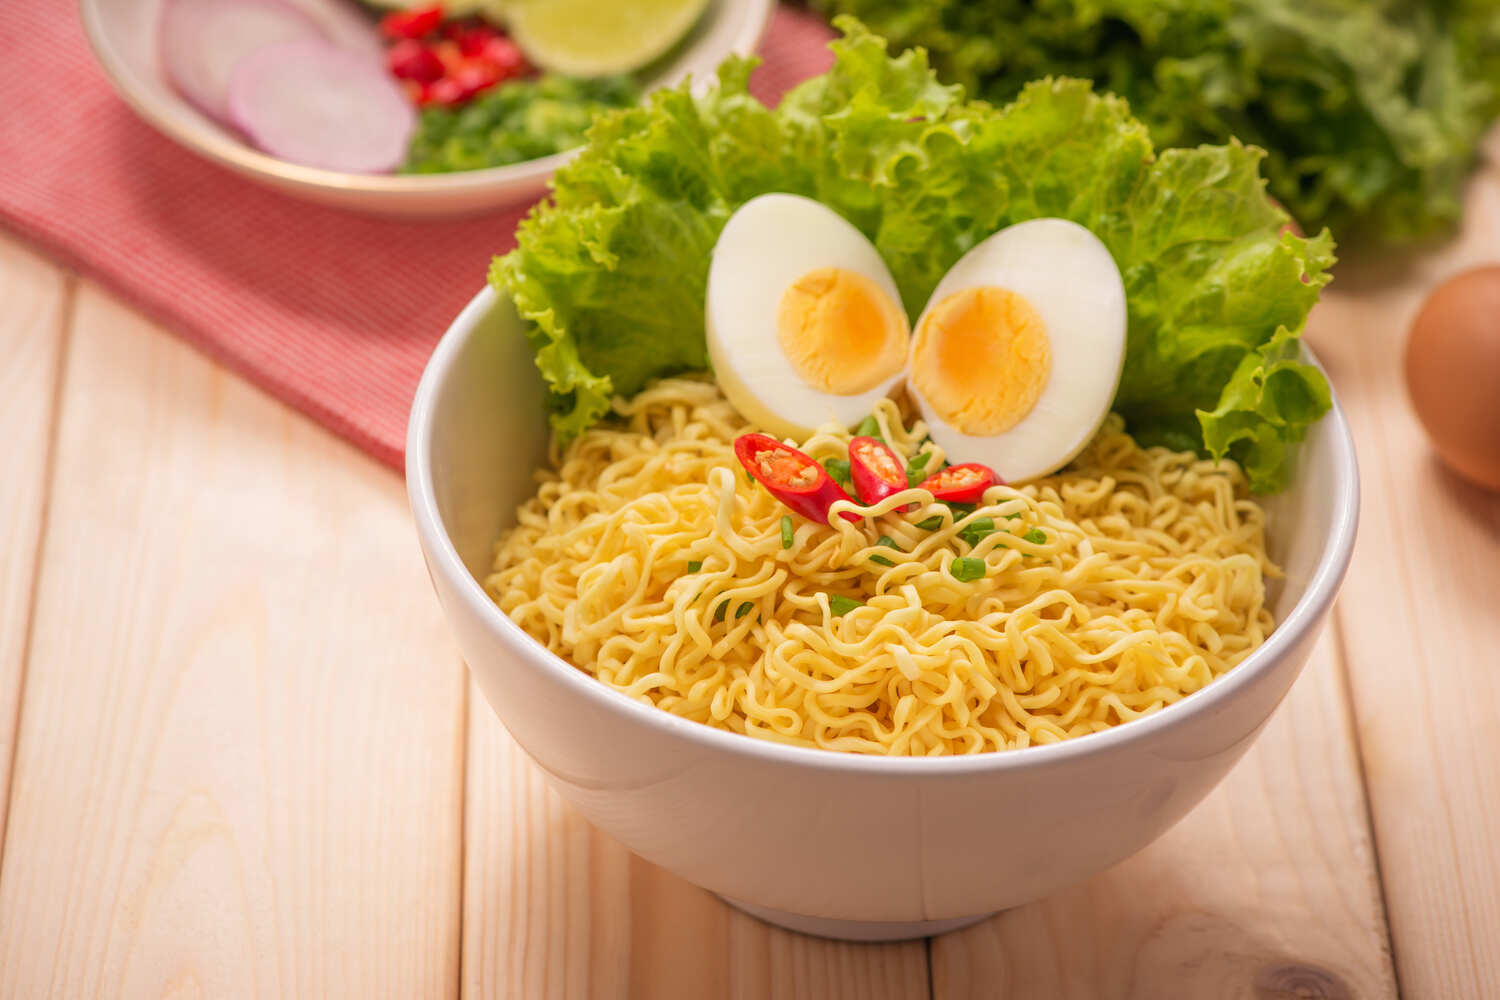 A bowl of noodles with boiled eggs